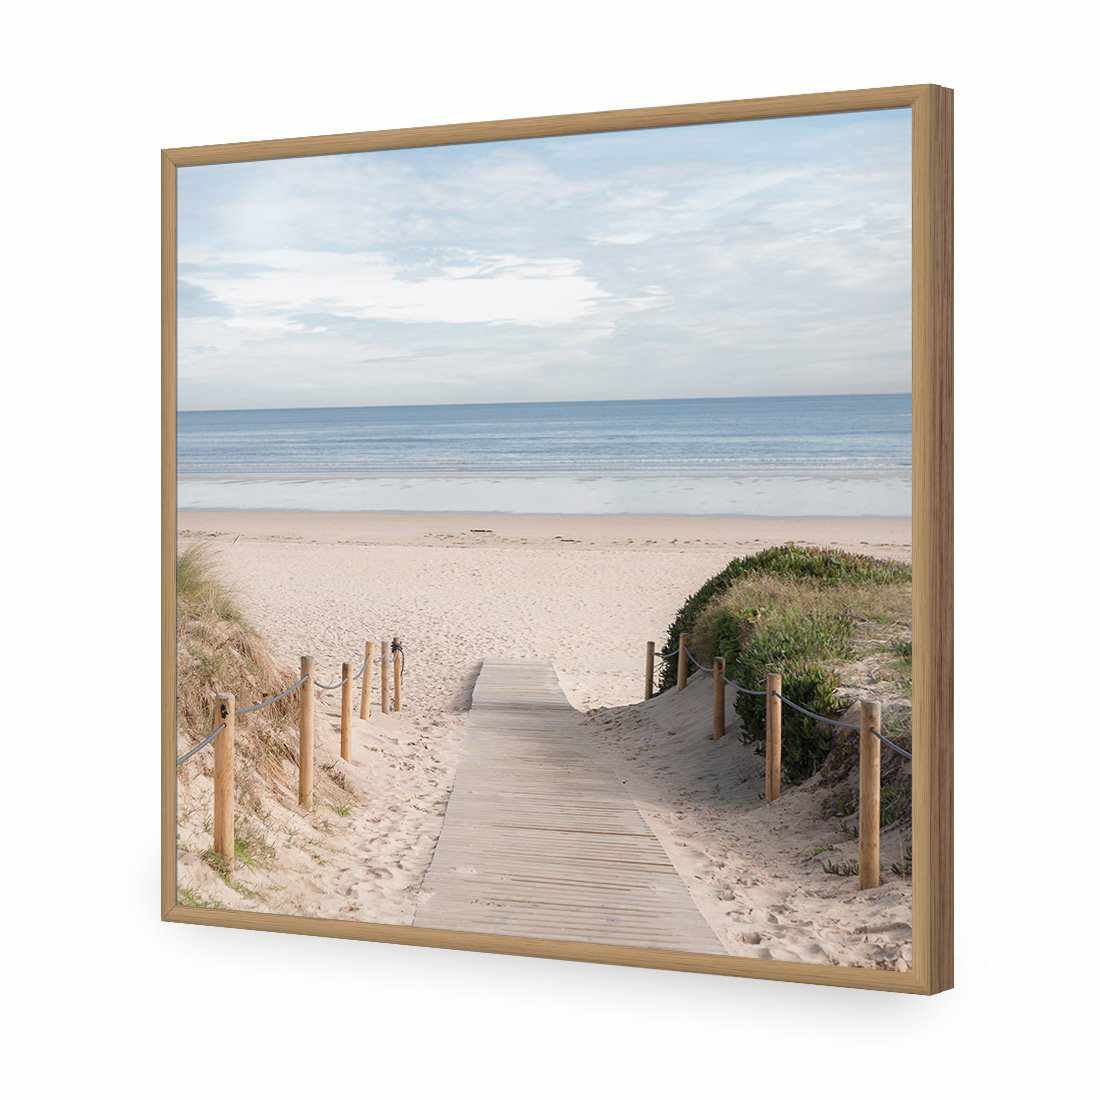 Pathway To The Sea, Square-Acrylic-Wall Art Design-Without Border-Acrylic - Oak Frame-37x37cm-Wall Art Designs